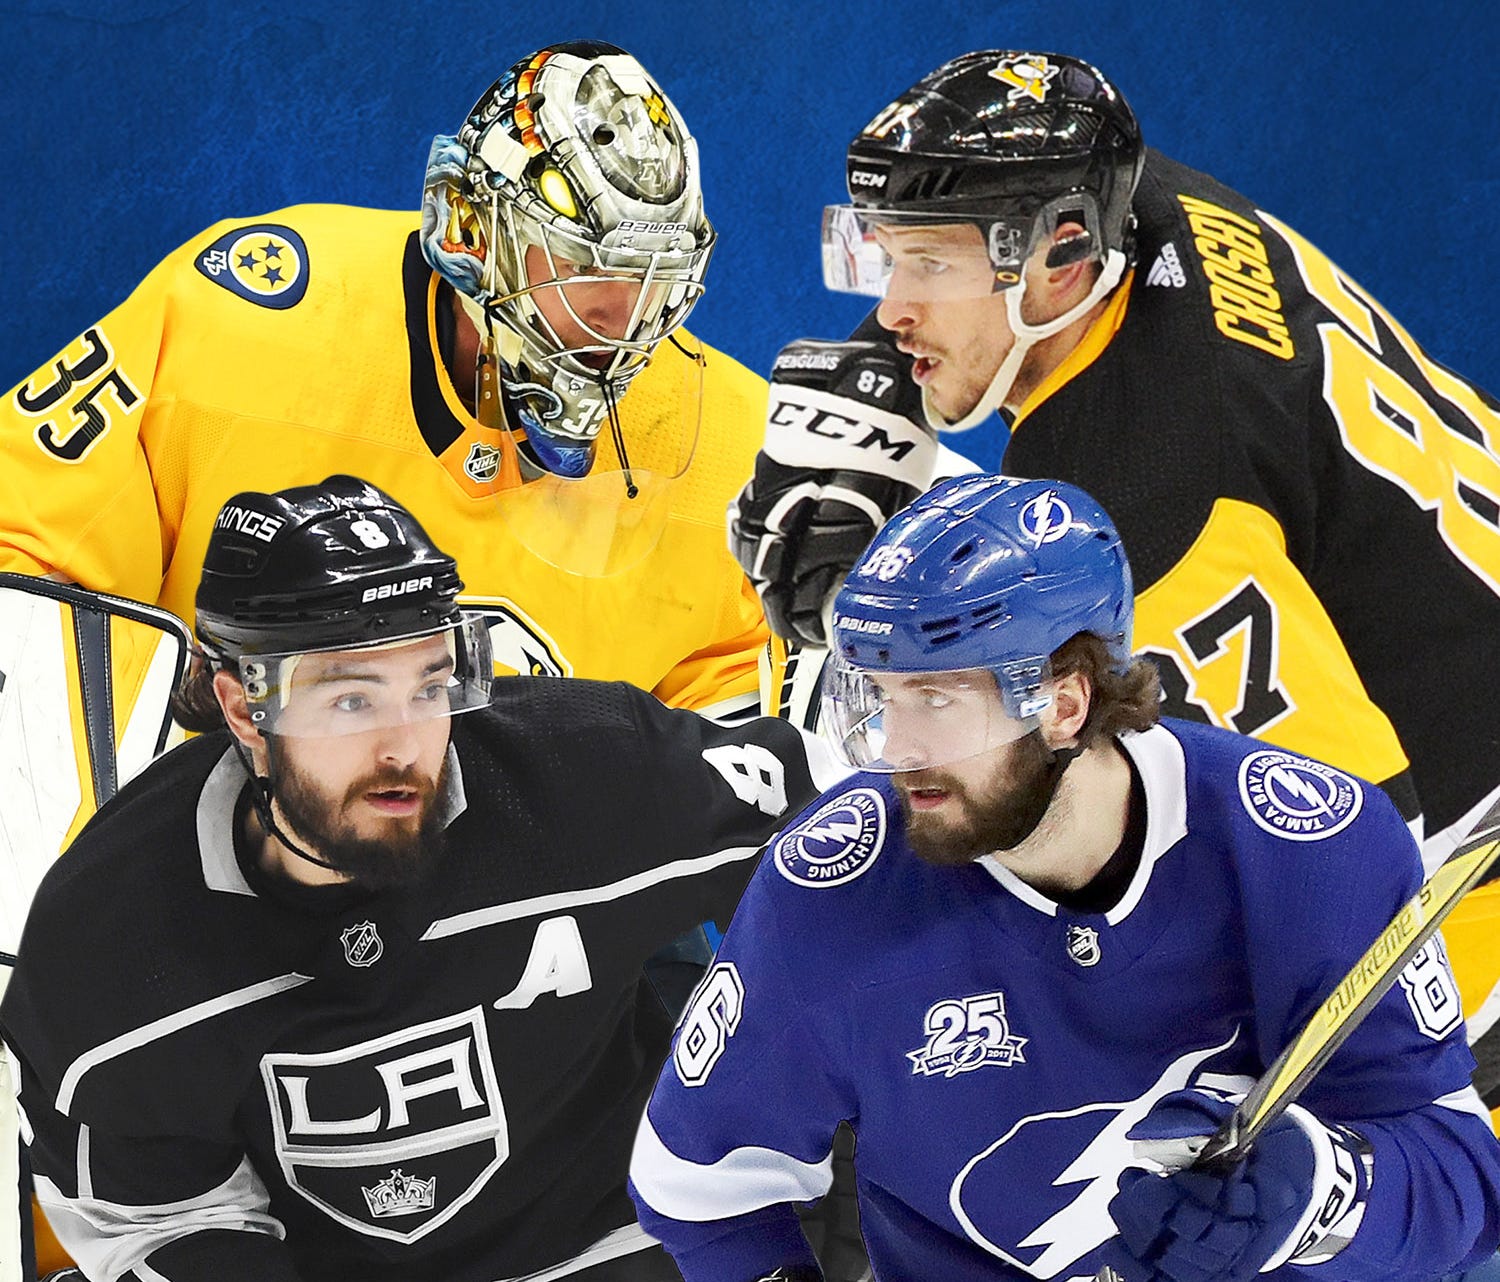 Pekka Rinne (top left), Sidney Crosby (top right), Drew Doughty (bottom left) and Nikita Kucherov (bottom right) will look to lead their respective teams to a 2018 Stanley Cup.